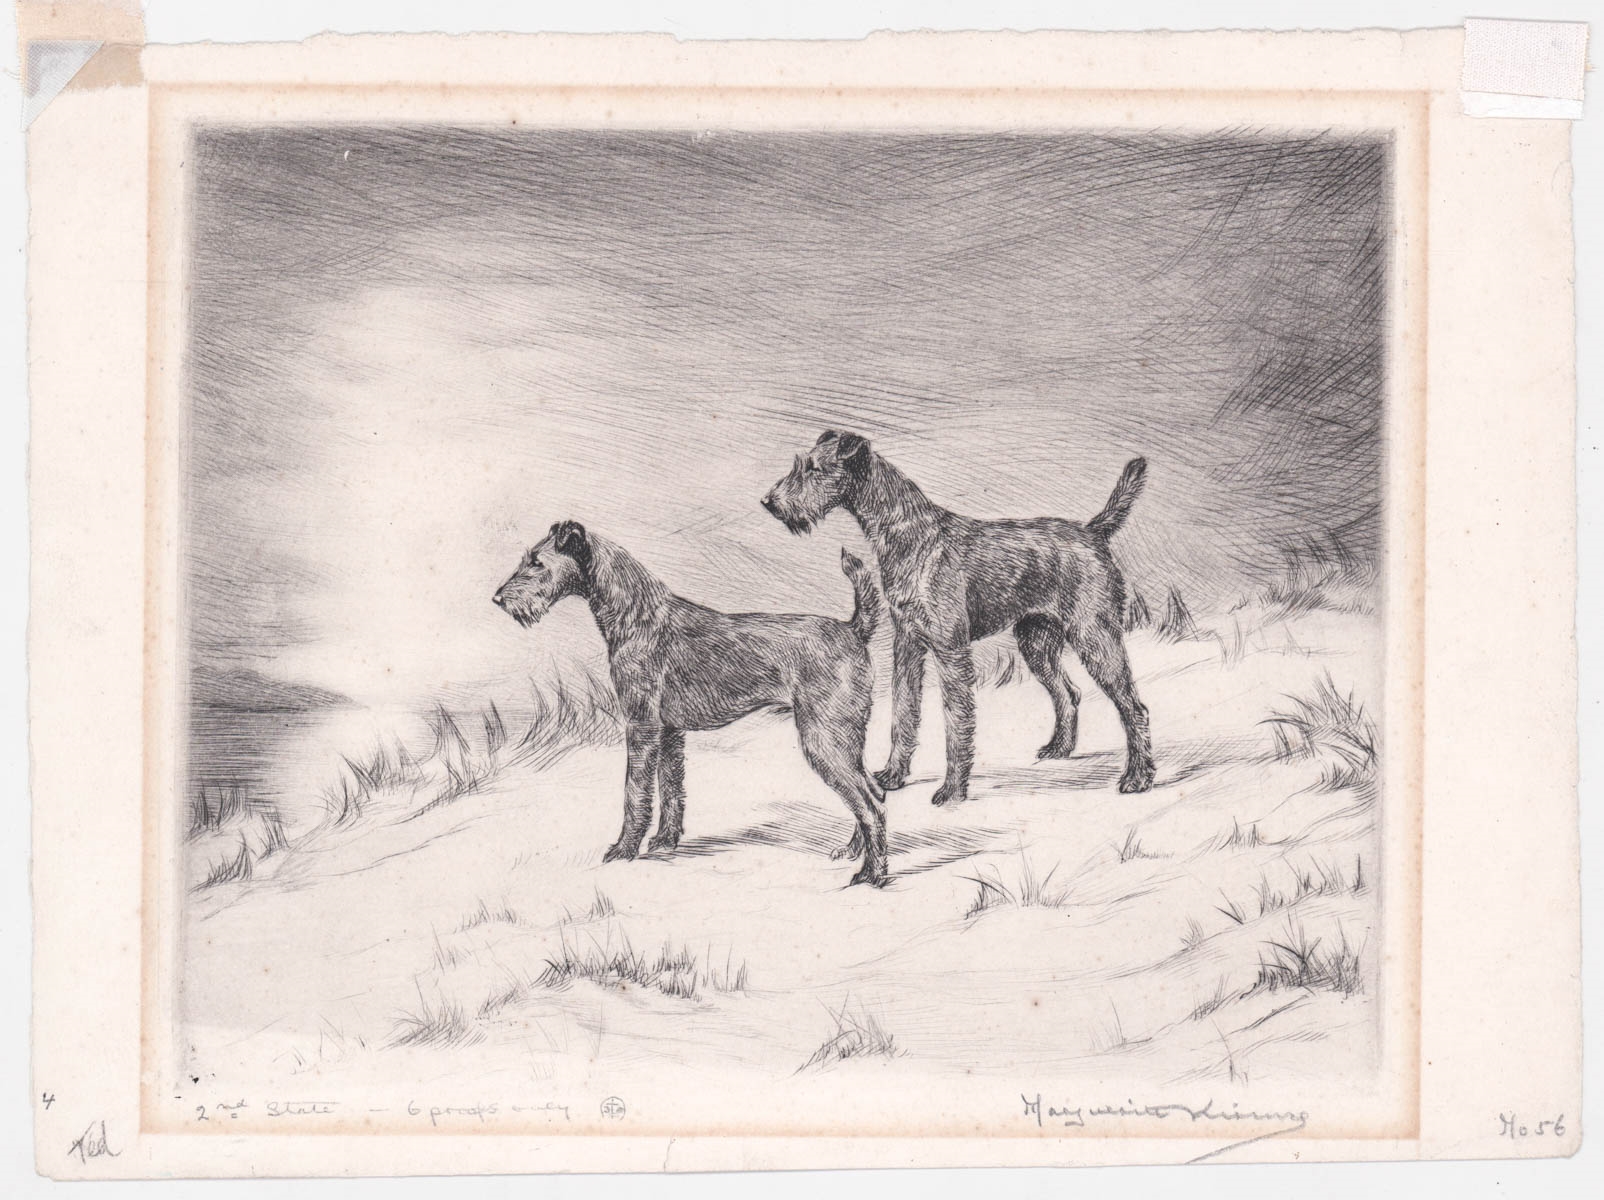 Artwork by Marguerite Kirmse, Marguerite Kirmse Etching Signed [Dogs], Made of Etching